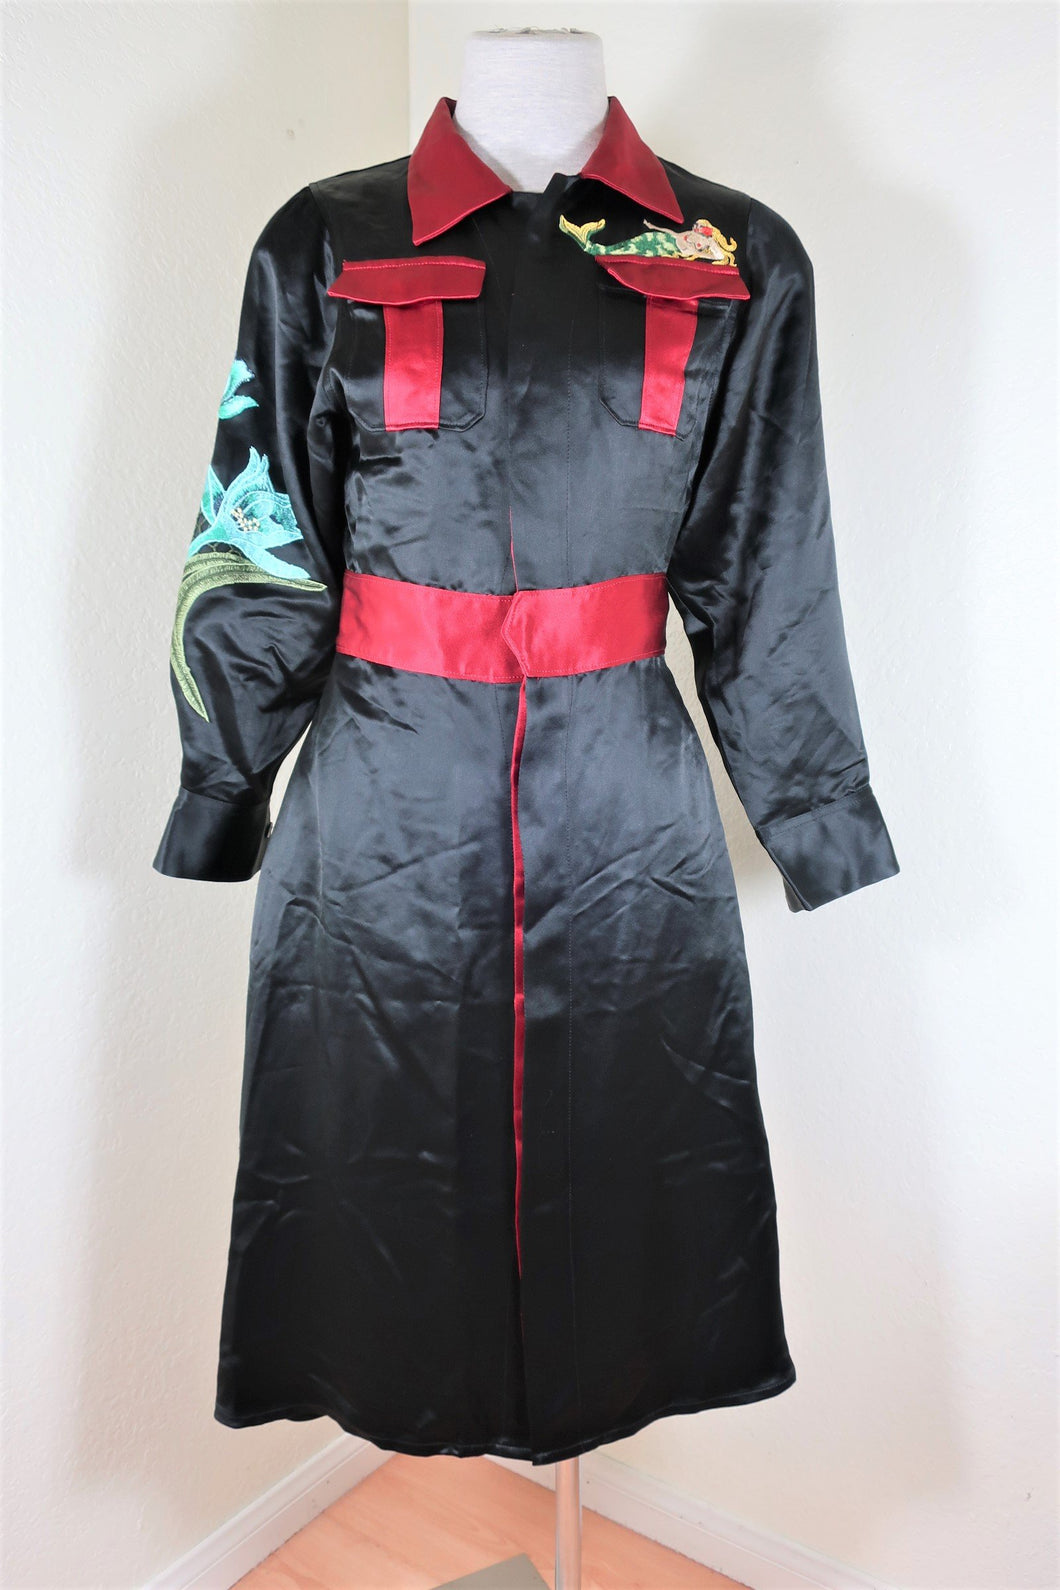 AHCAHCUM Black Red Embroidered Robe Acetate Dress Small XS 2 3 4